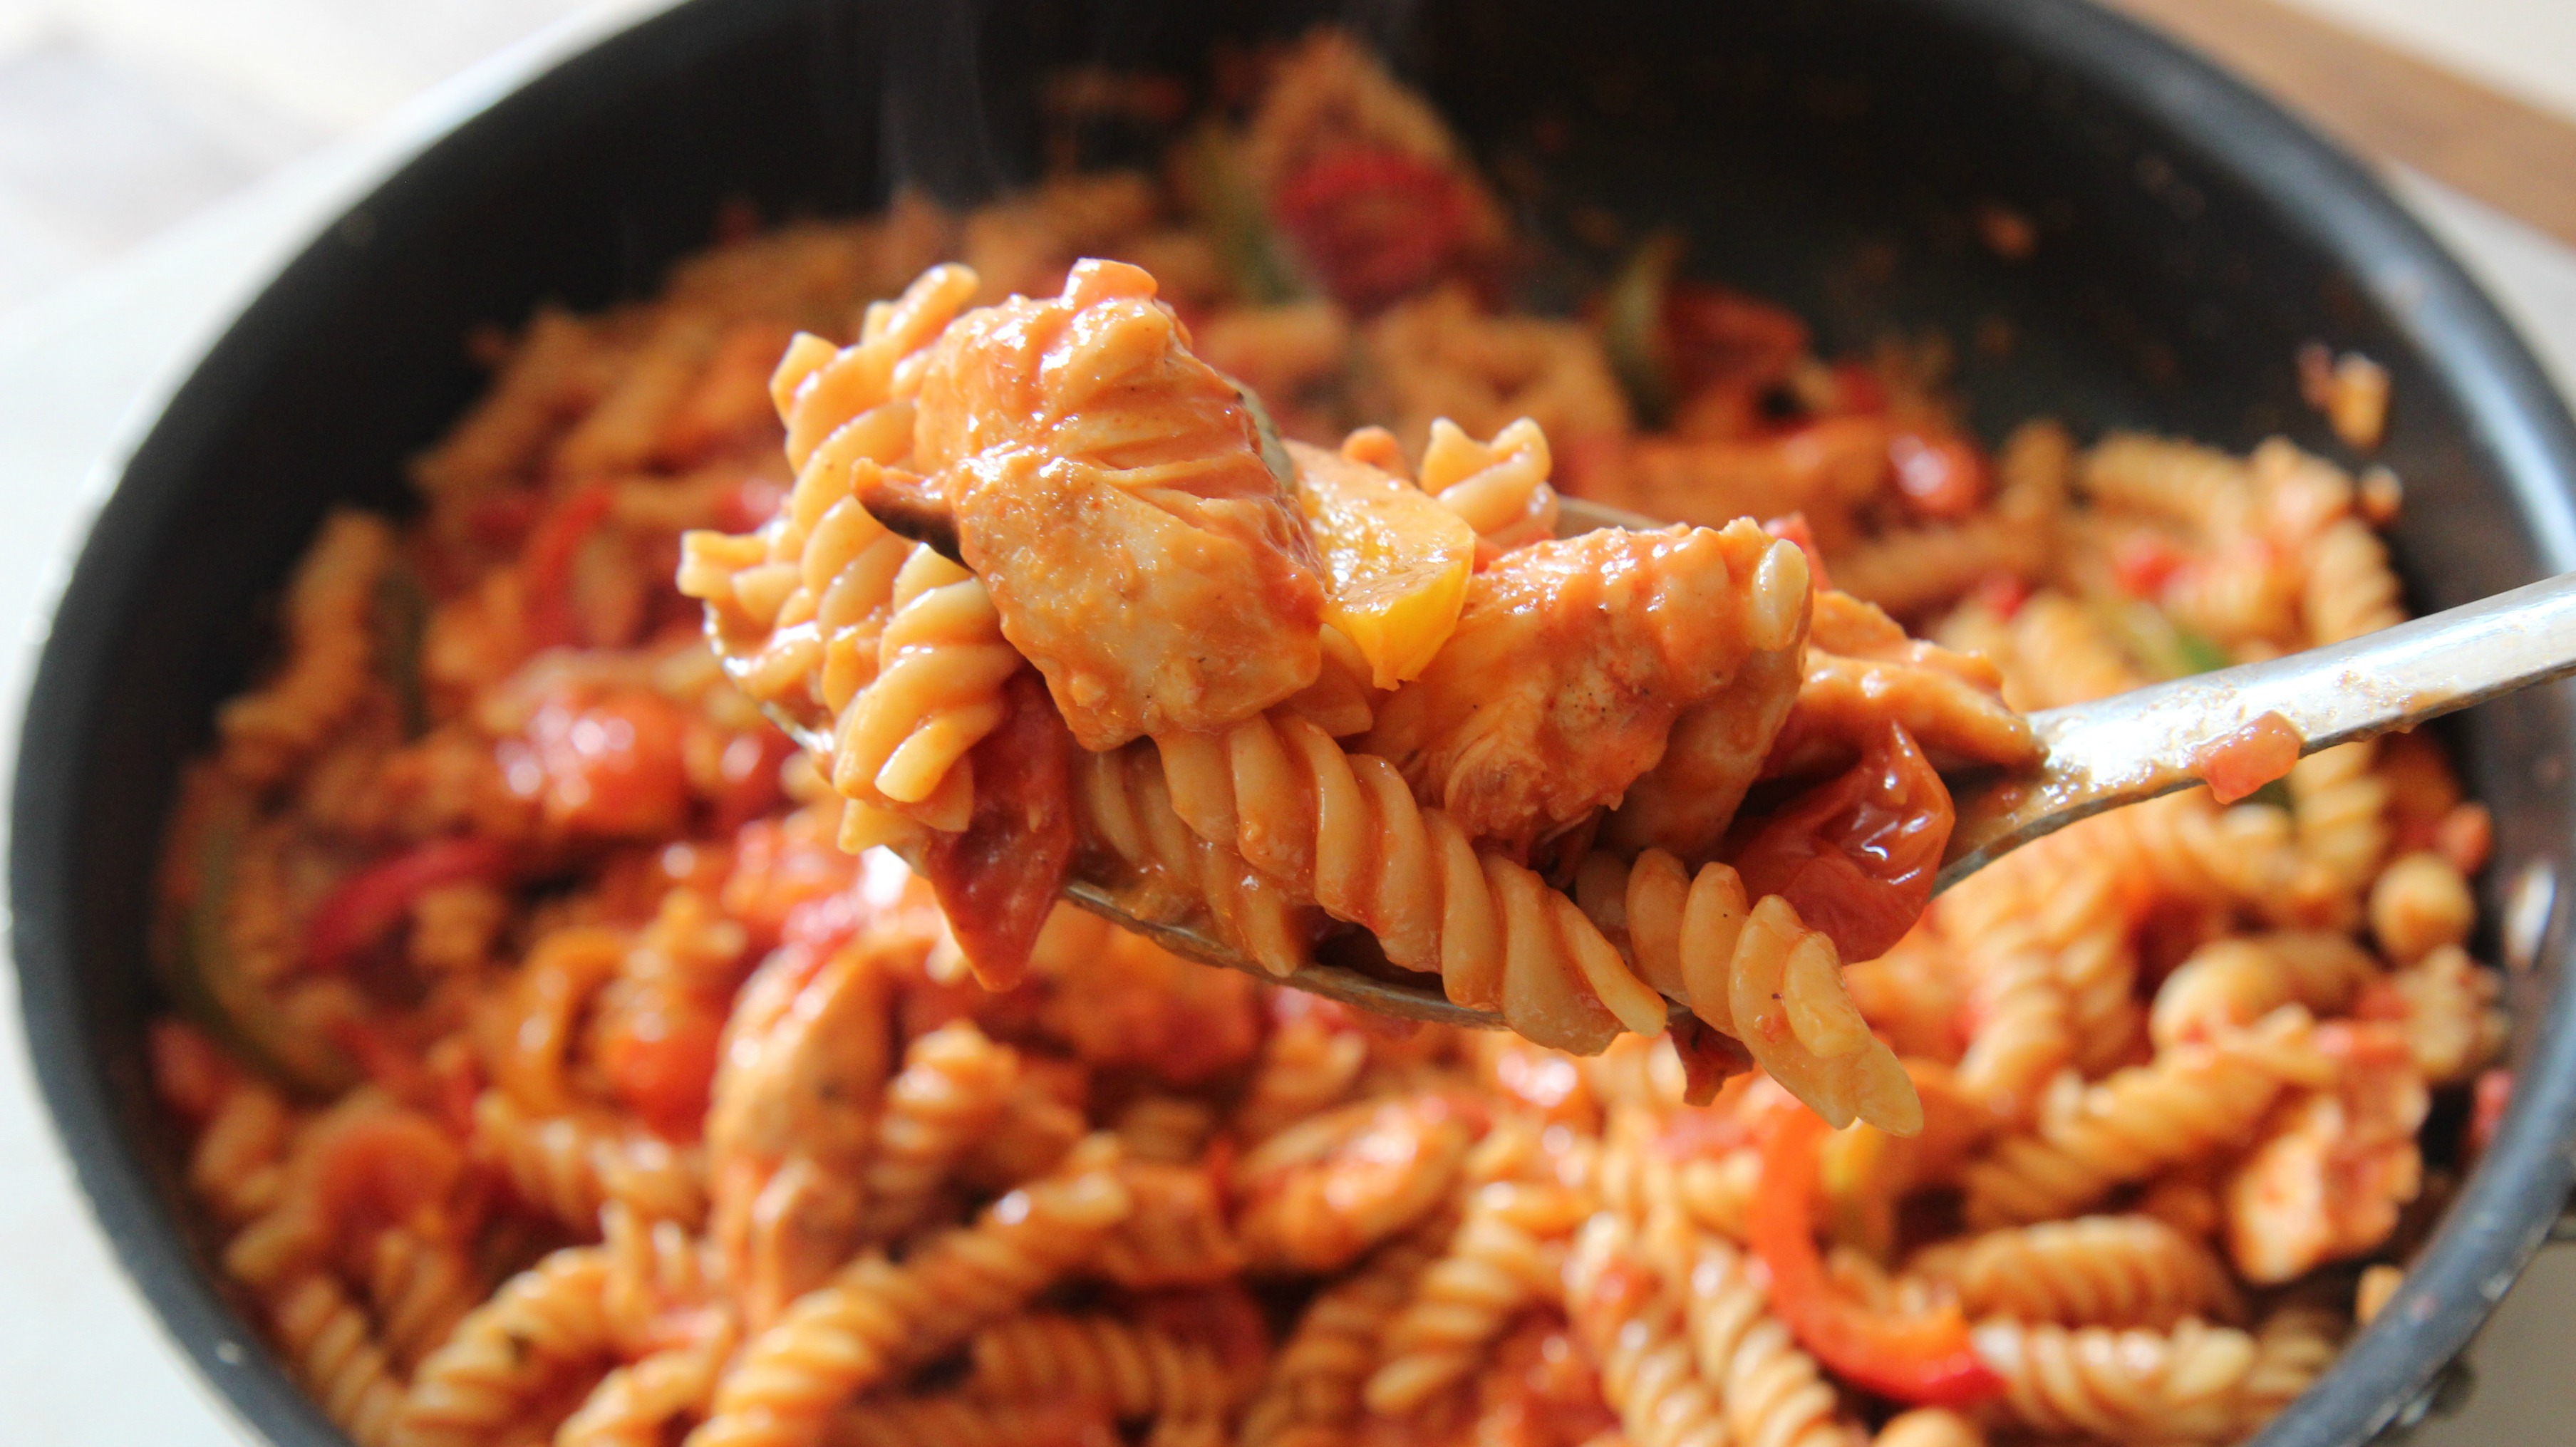 Packed with Tex-Mex flavor, this chicken fajita pasta recipe is sure to pack a punch.